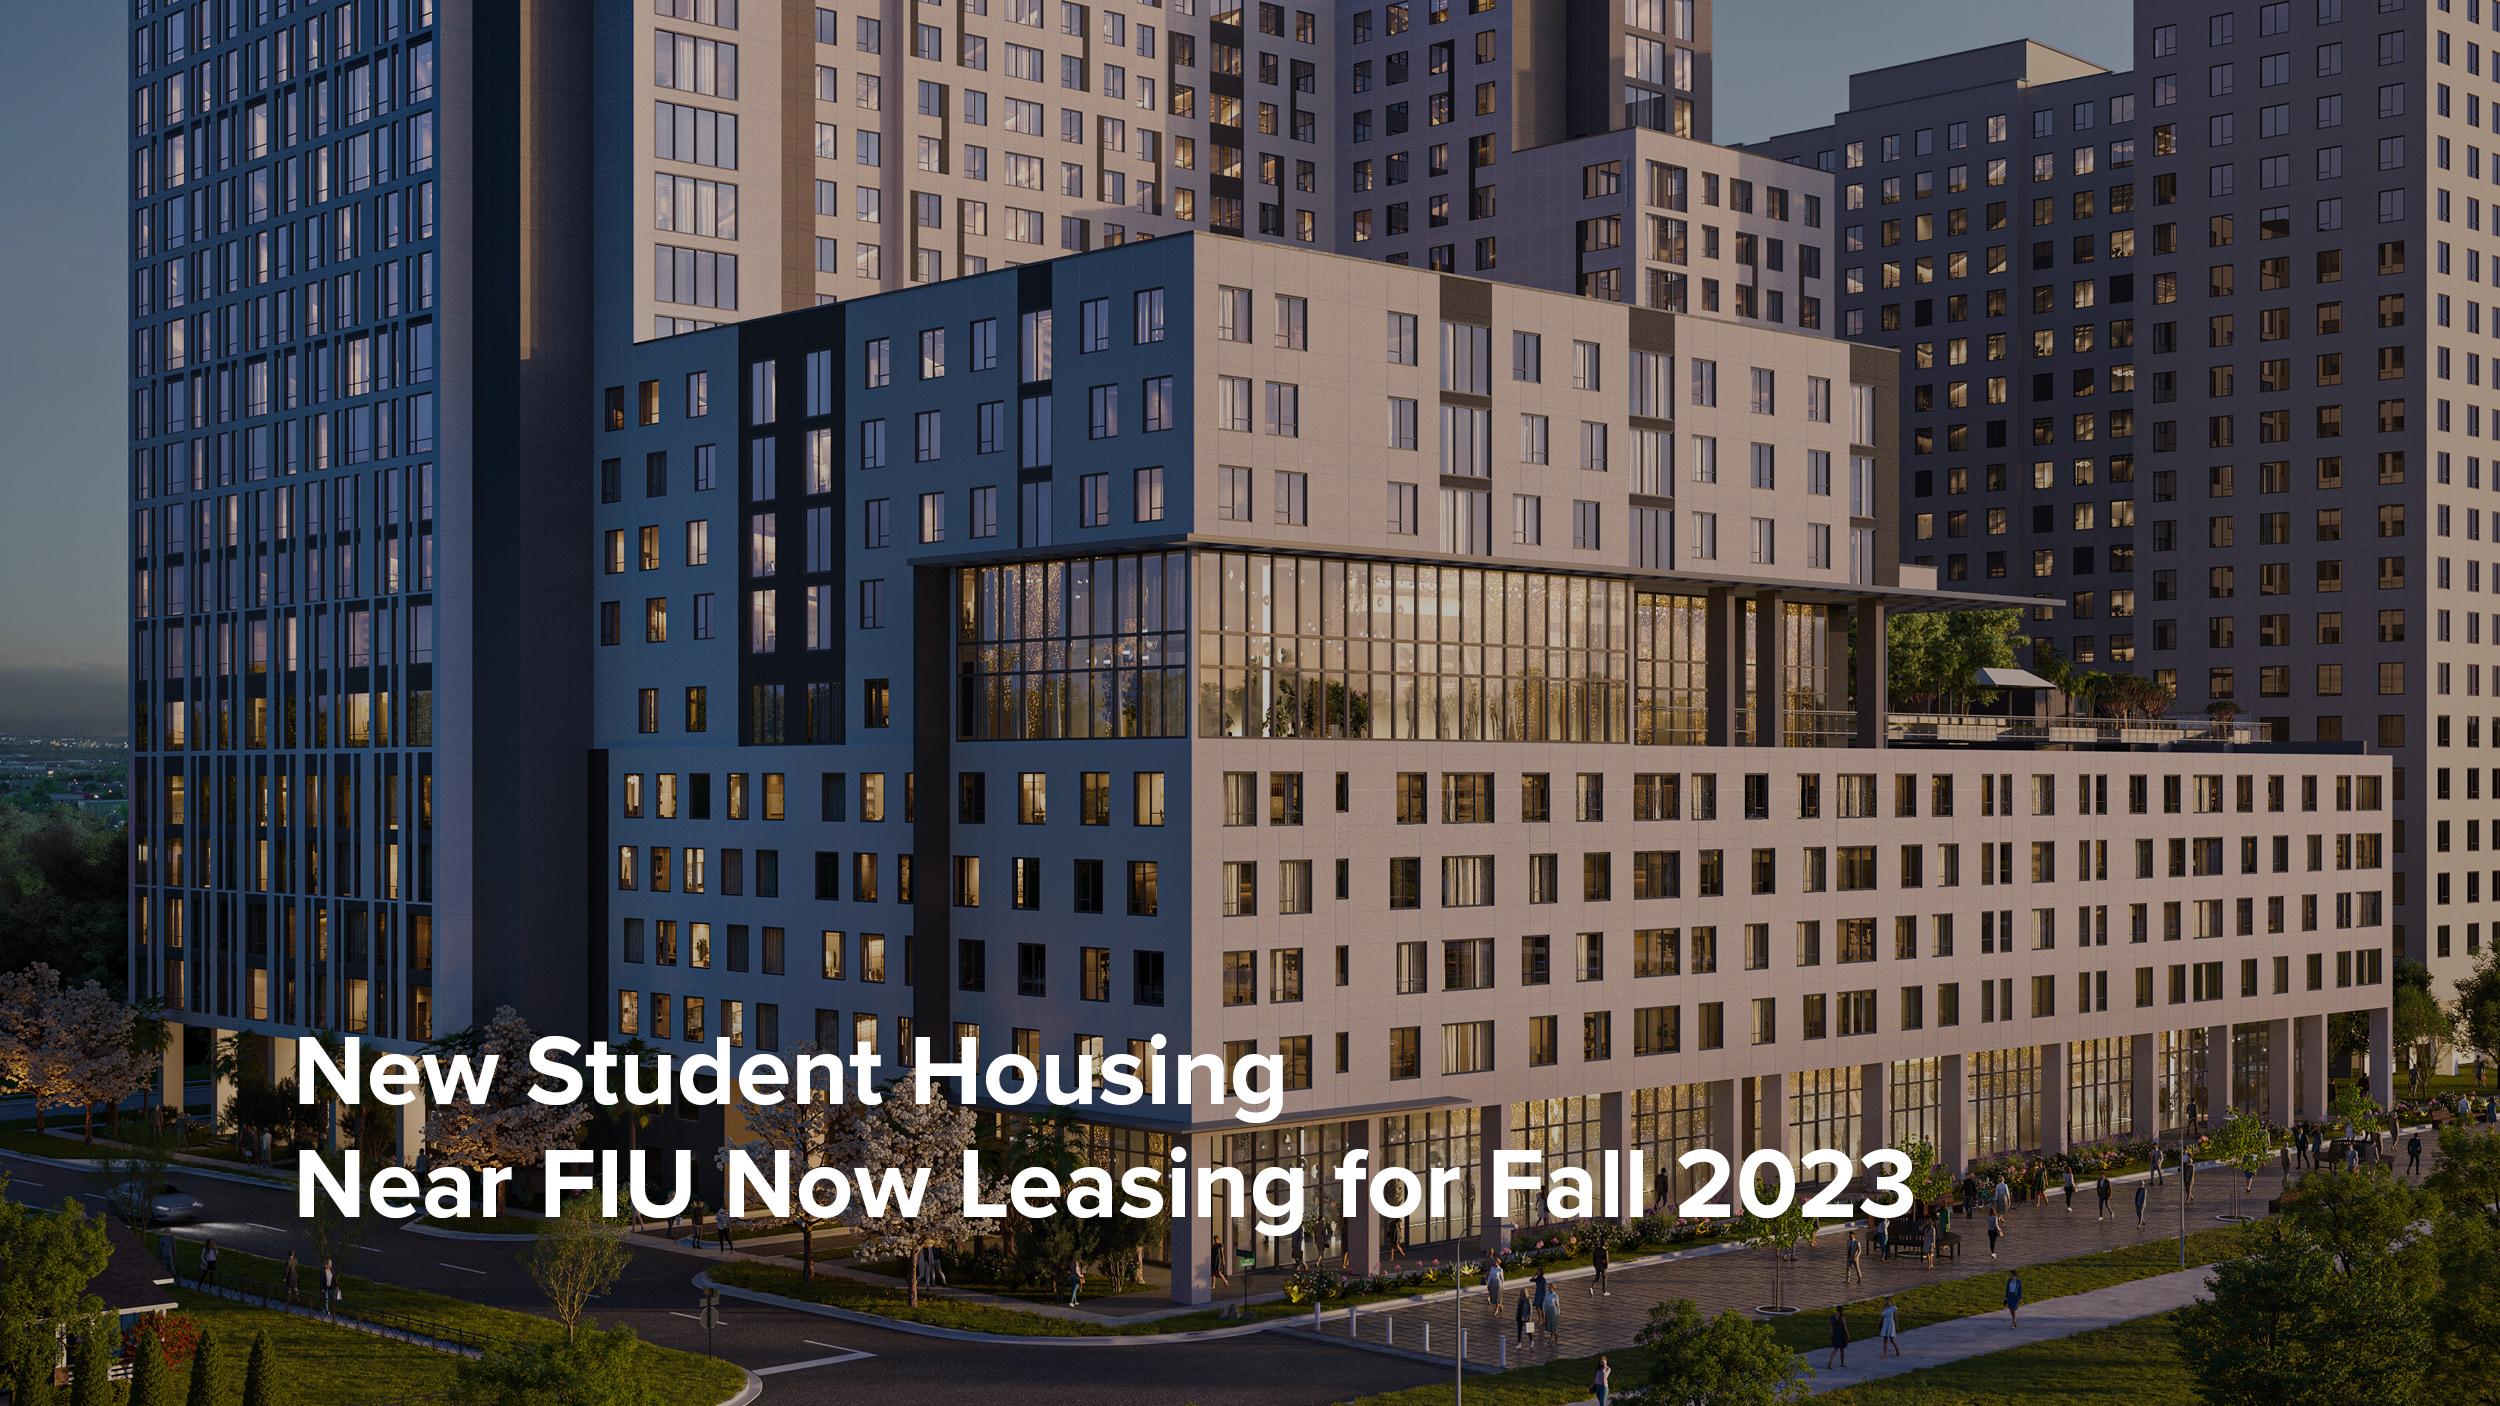 Lapis exterior building rendering with dark overlay. Text: New Student Housing Near FIU Now Leasing for Fall 2023